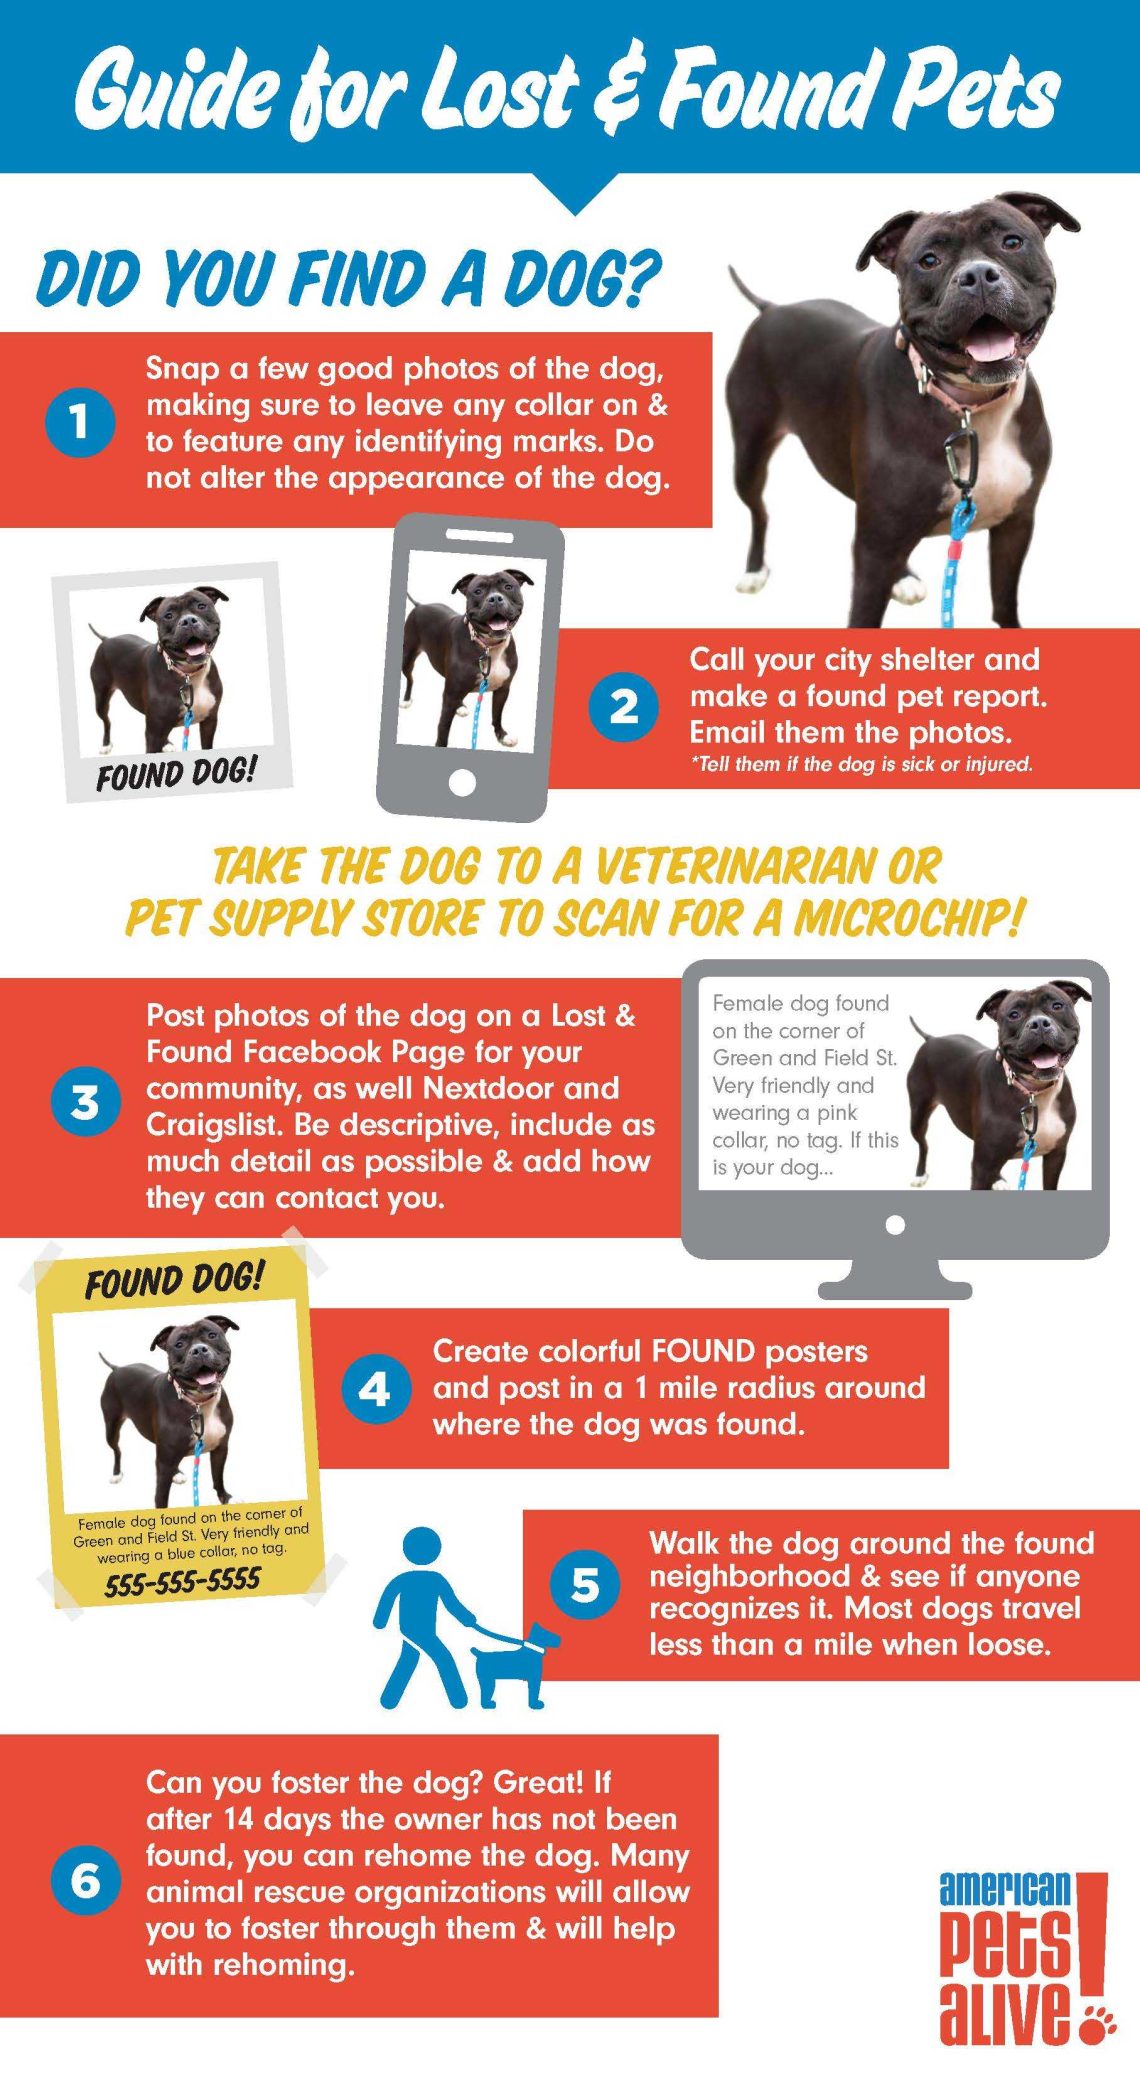 What to do if you find a dog?